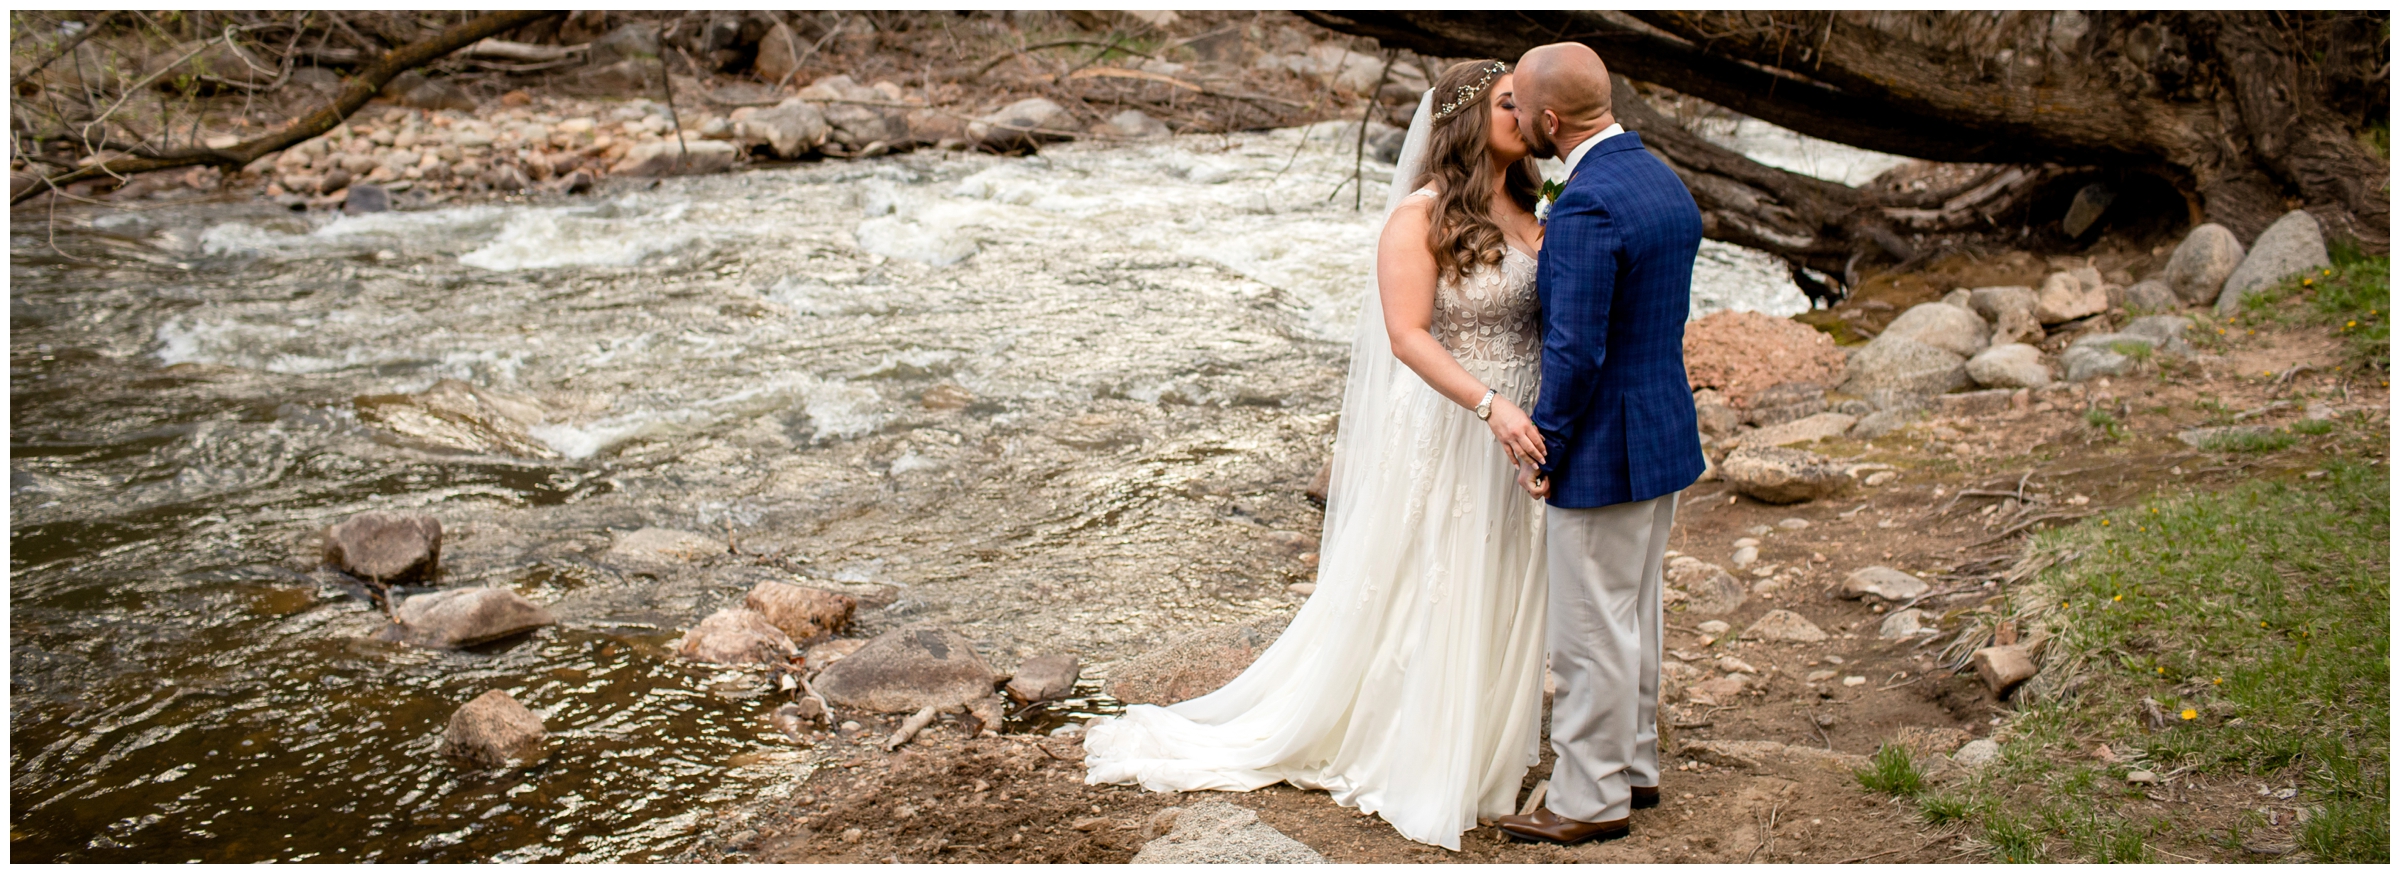 couple kissing next to river during couple's pictures at Boulder Creek by Wedgewood Weddings 